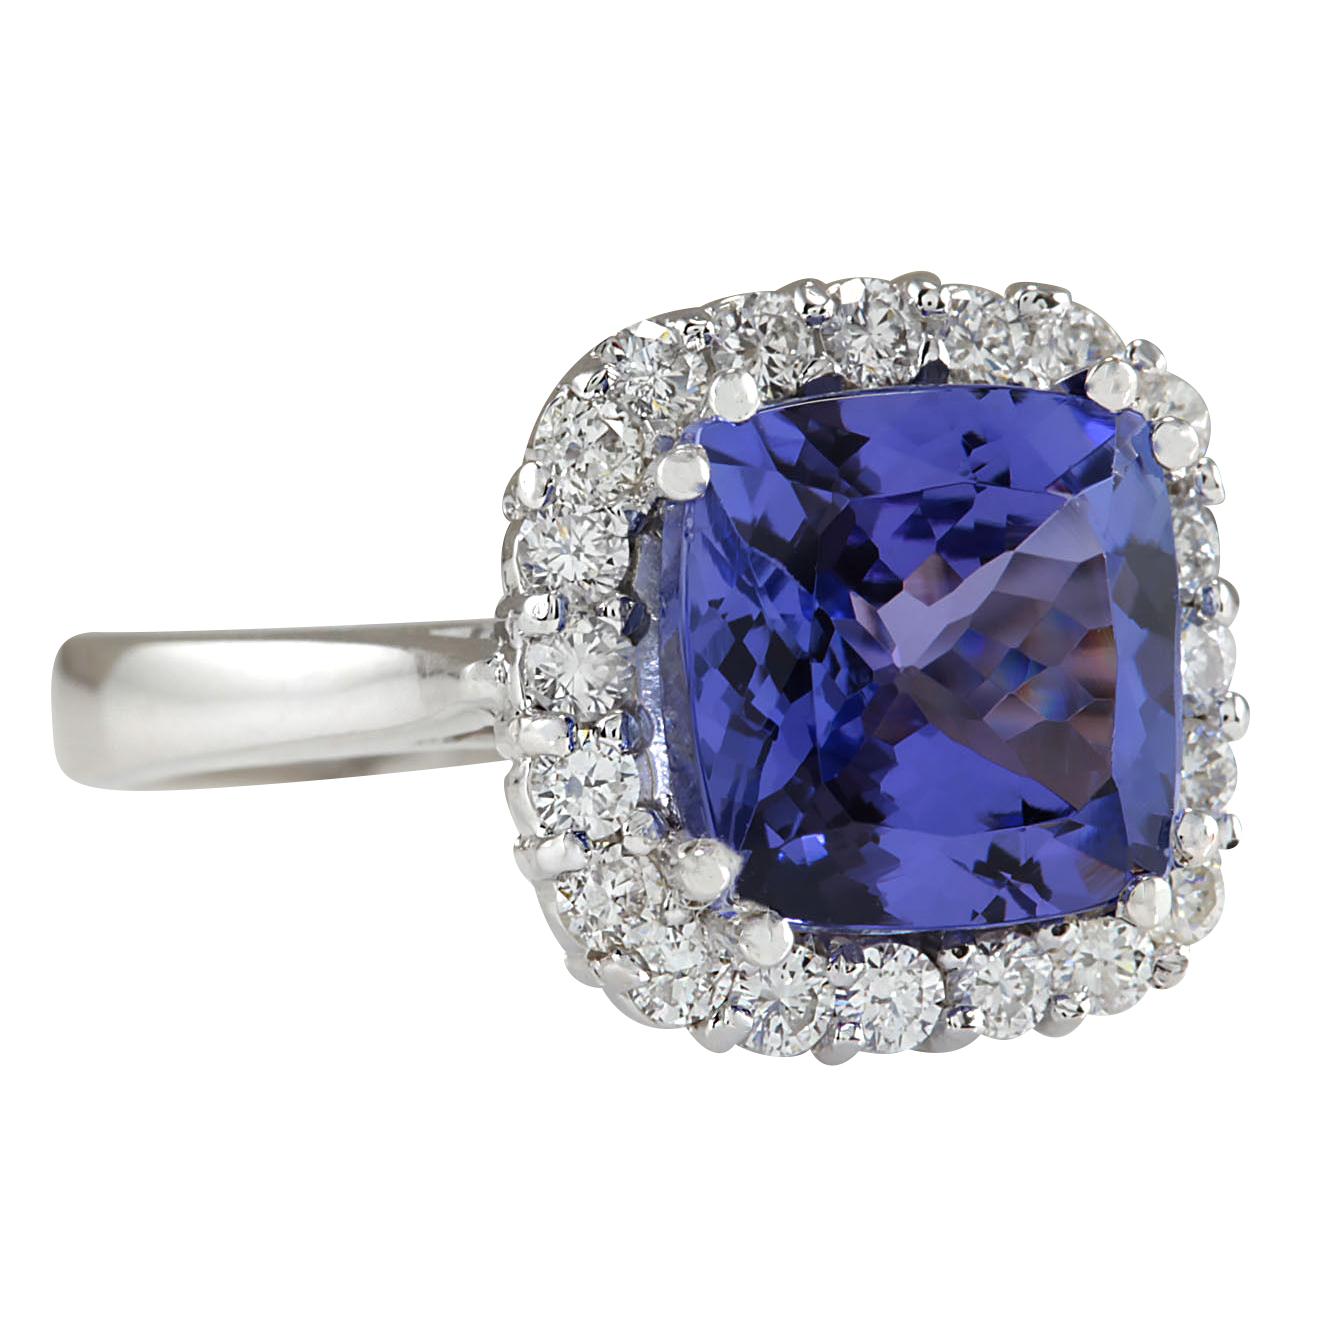 Stamped: 14K White Gold
Total Ring Weight: 5.0 Grams
Total Natural Tanzanite Weight is 4.71 Carat (Measures: 9.50x9.50 mm)
Color: Blue
Total Natural Diamond Weight is 0.64 Carat
Color: F-G, Clarity: VS2-SI1
Face Measures: 13.60x13.60 mm
Sku: